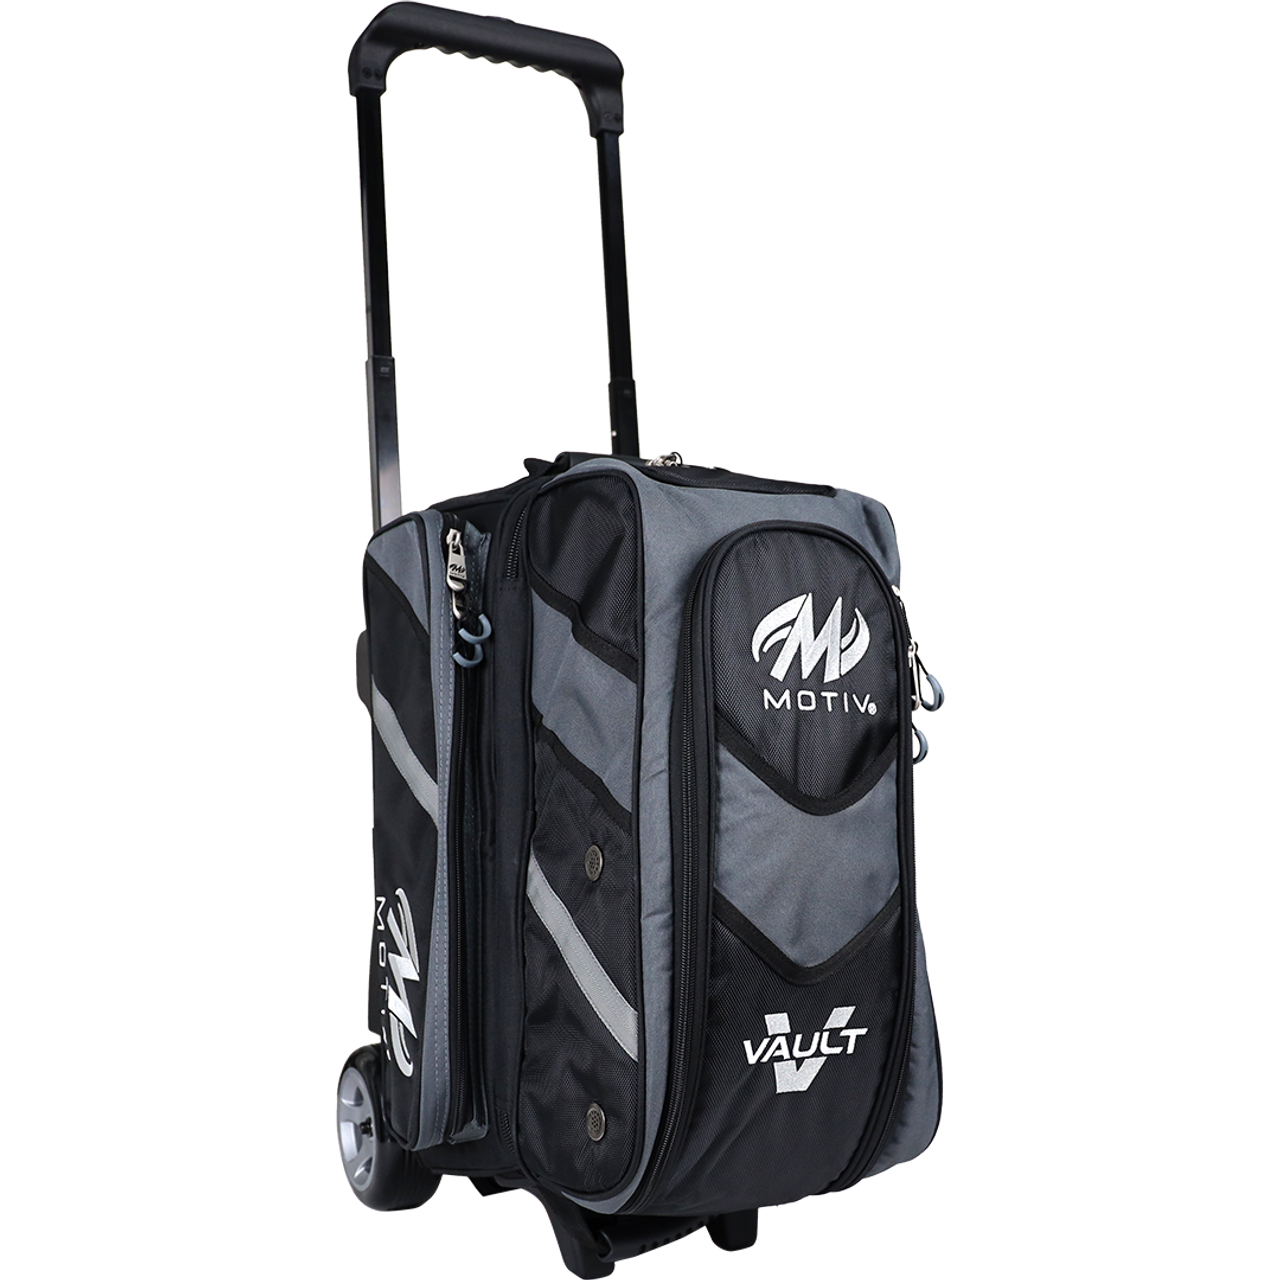 Motiv Vault 2 Ball Double Roller Covert Black Bowling Bag Questions & Answers